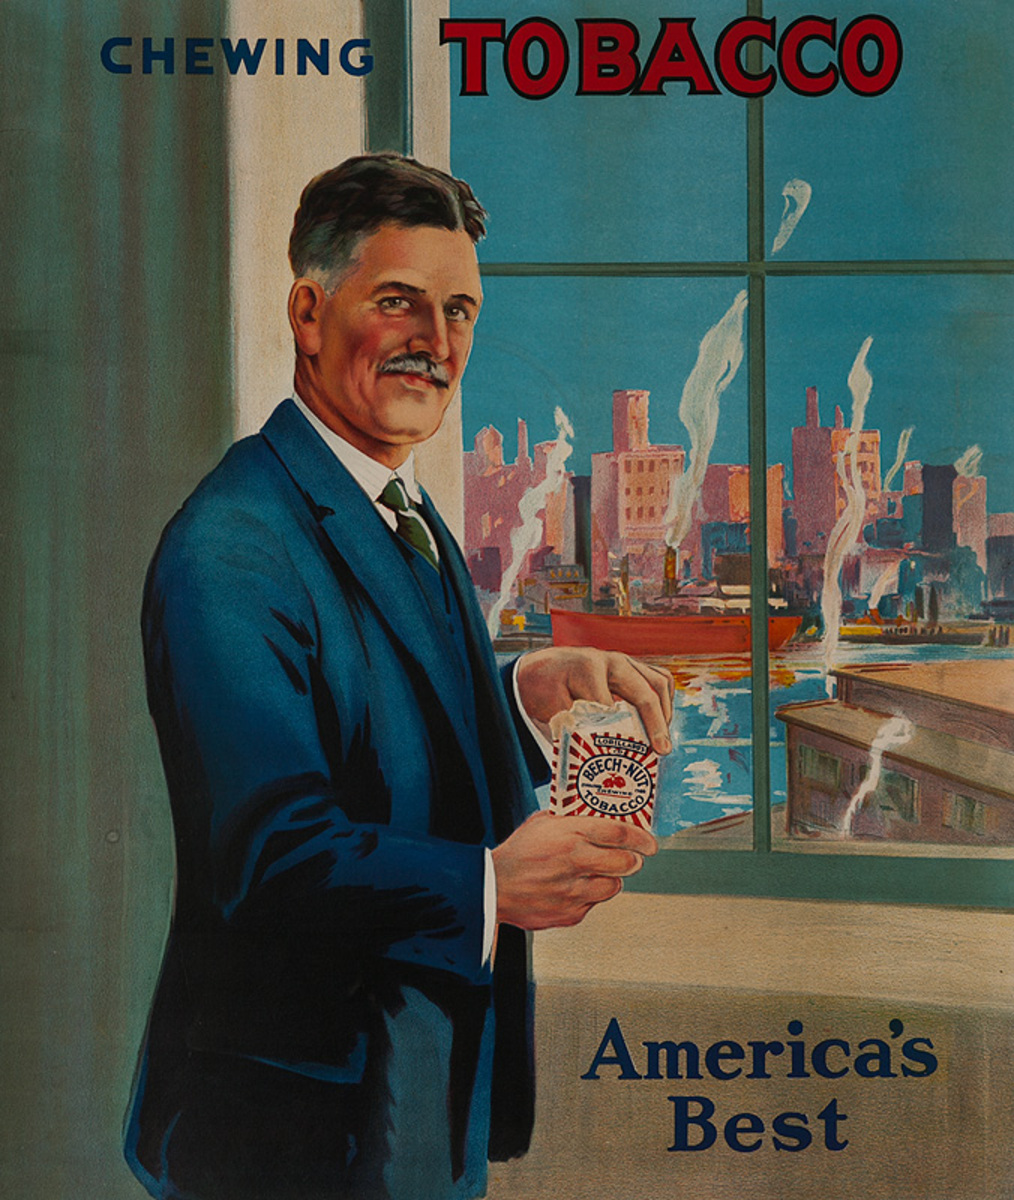 America's Best Chewing Tobacco Original American Advertising Poster